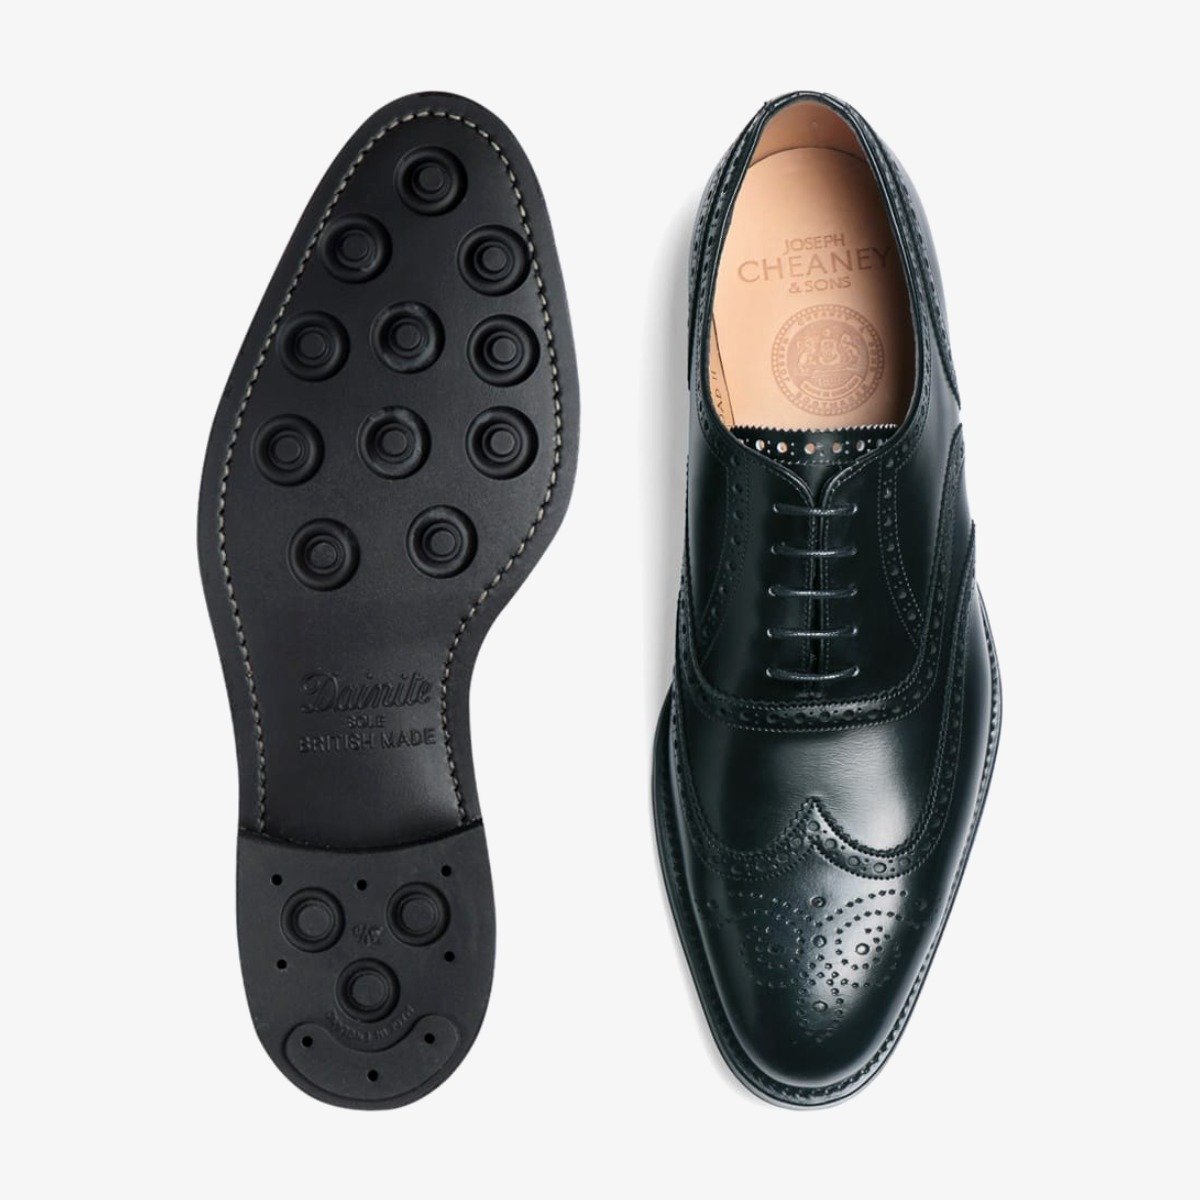 Cheaney Broad II black brogue men's oxford shoes - rubber soles